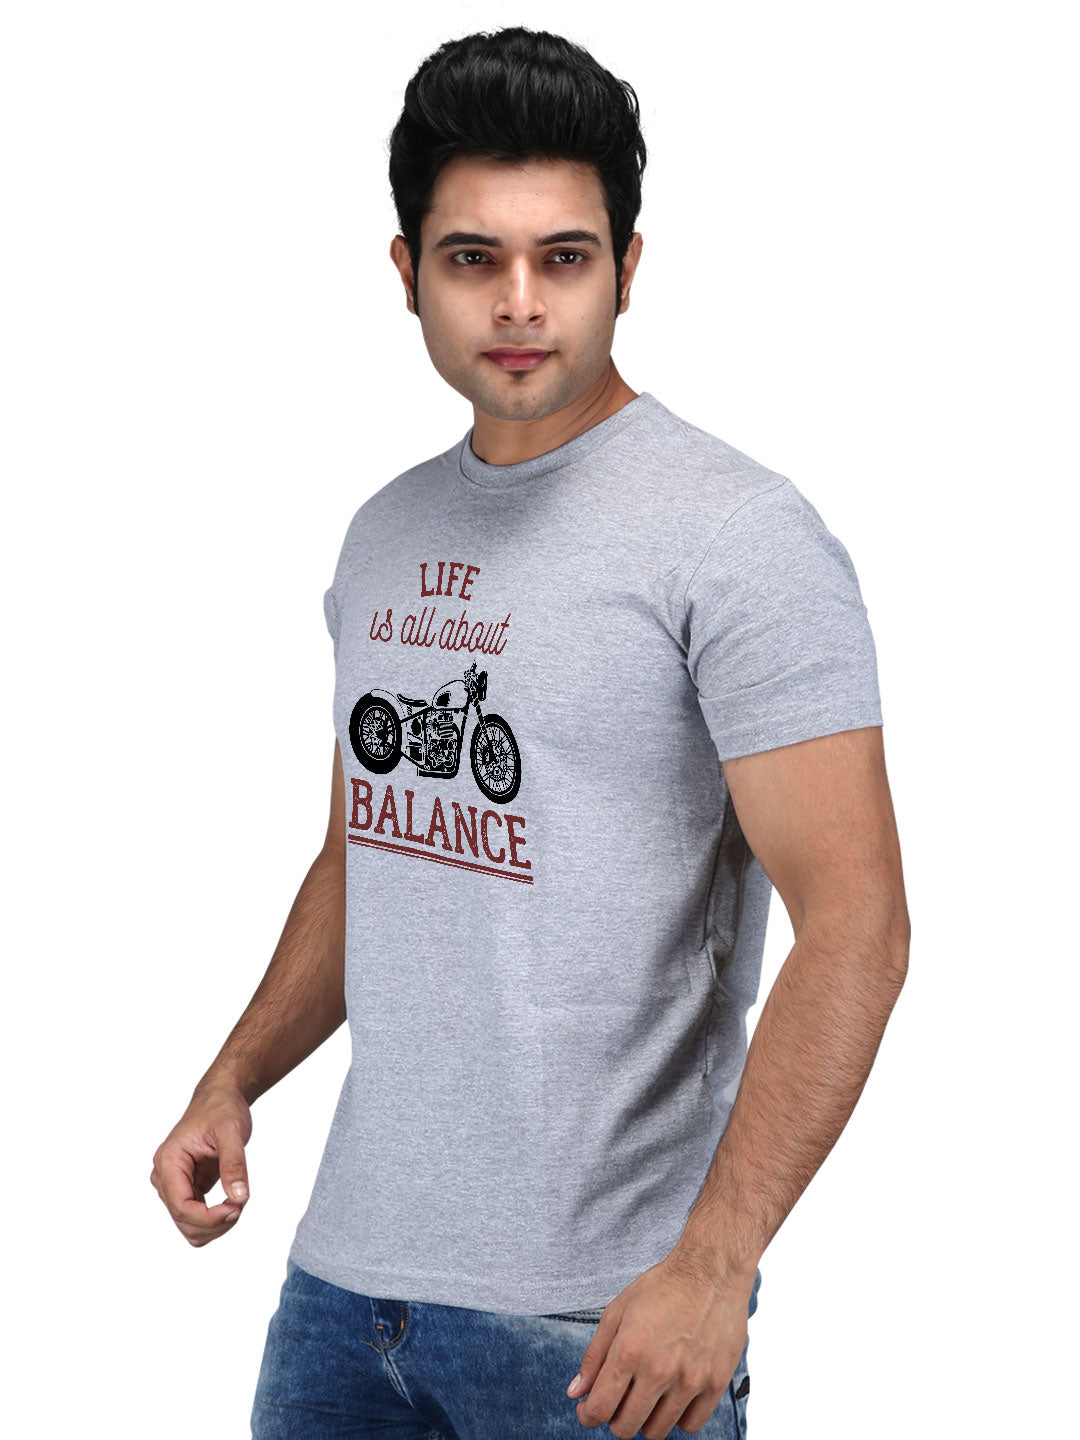 Life Is All About Balance - Premium Round Neck Cotton Tees for Men - Grey Melange